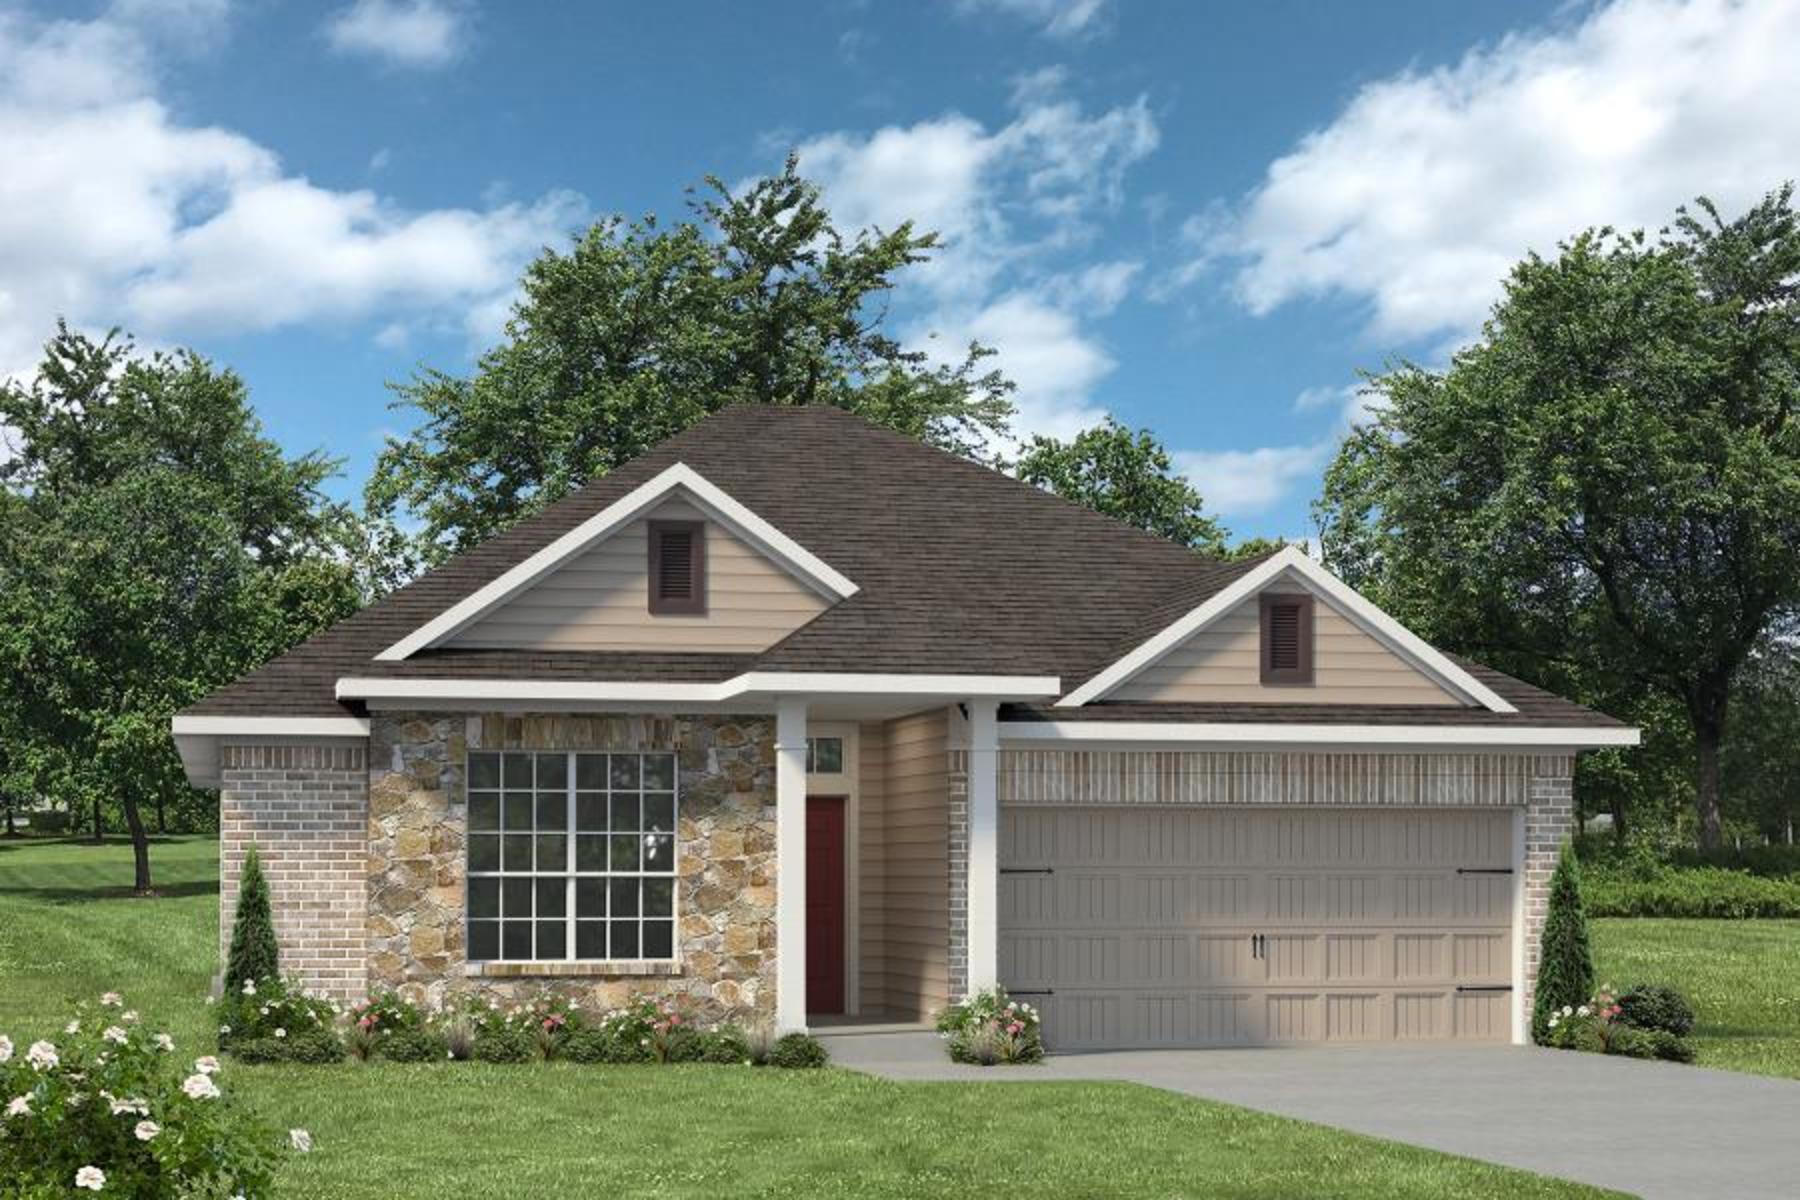 https://myhome.anewgo.com/client/stylecraft/community/Build%20On%20Your%20Lot/plan/1514%20%7C%20Bedford%20Select?elevId=68. Bedford Home with 3 Bedrooms